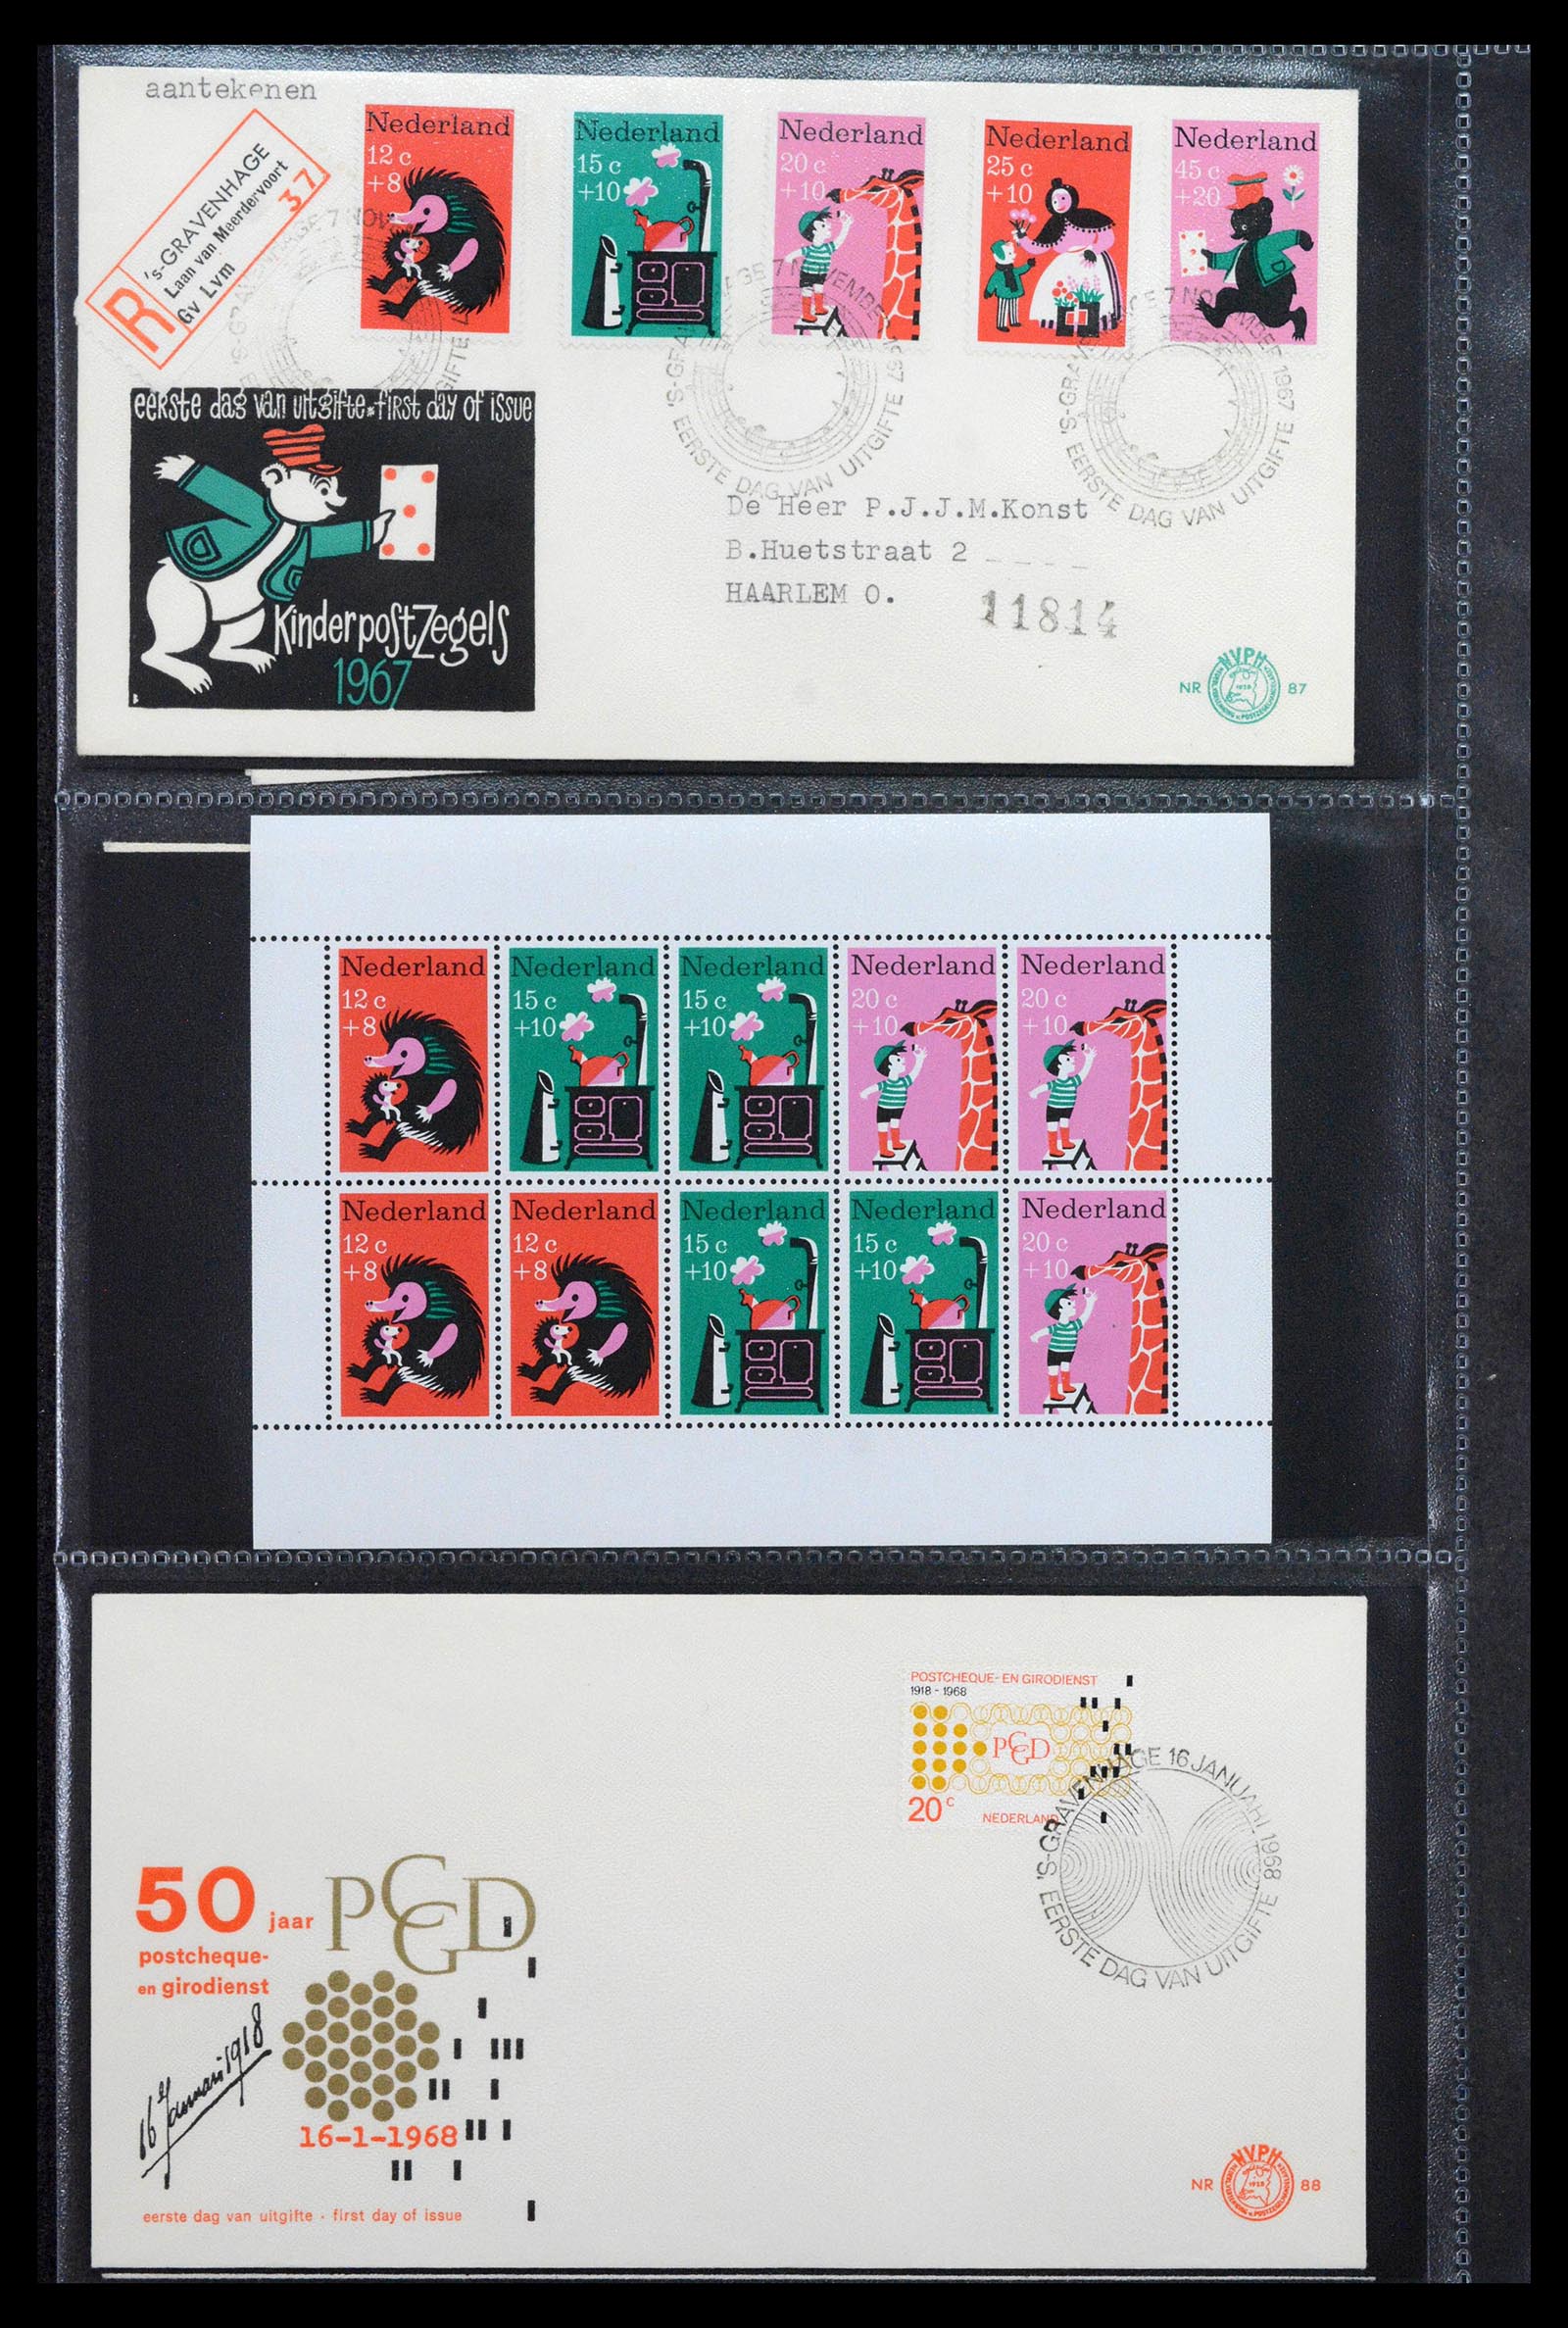 39041 0032 - Stamp collection 39041 Netherlands first day covers 1950-1977.